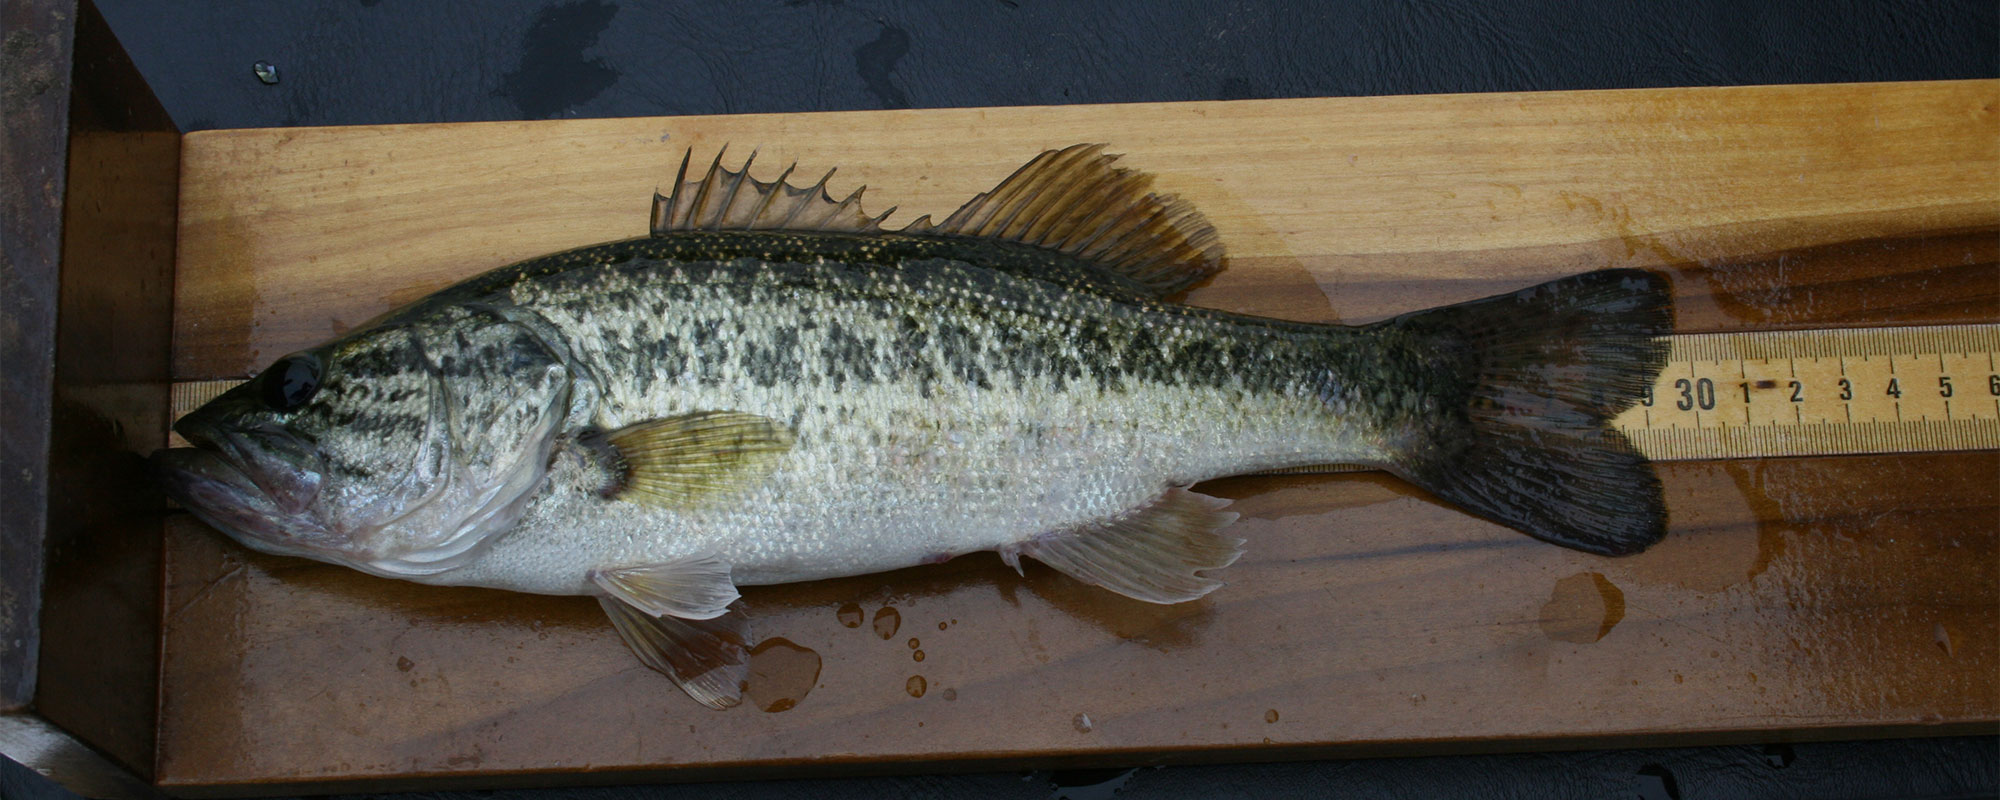 Measuring a recently-caught largemouth bass